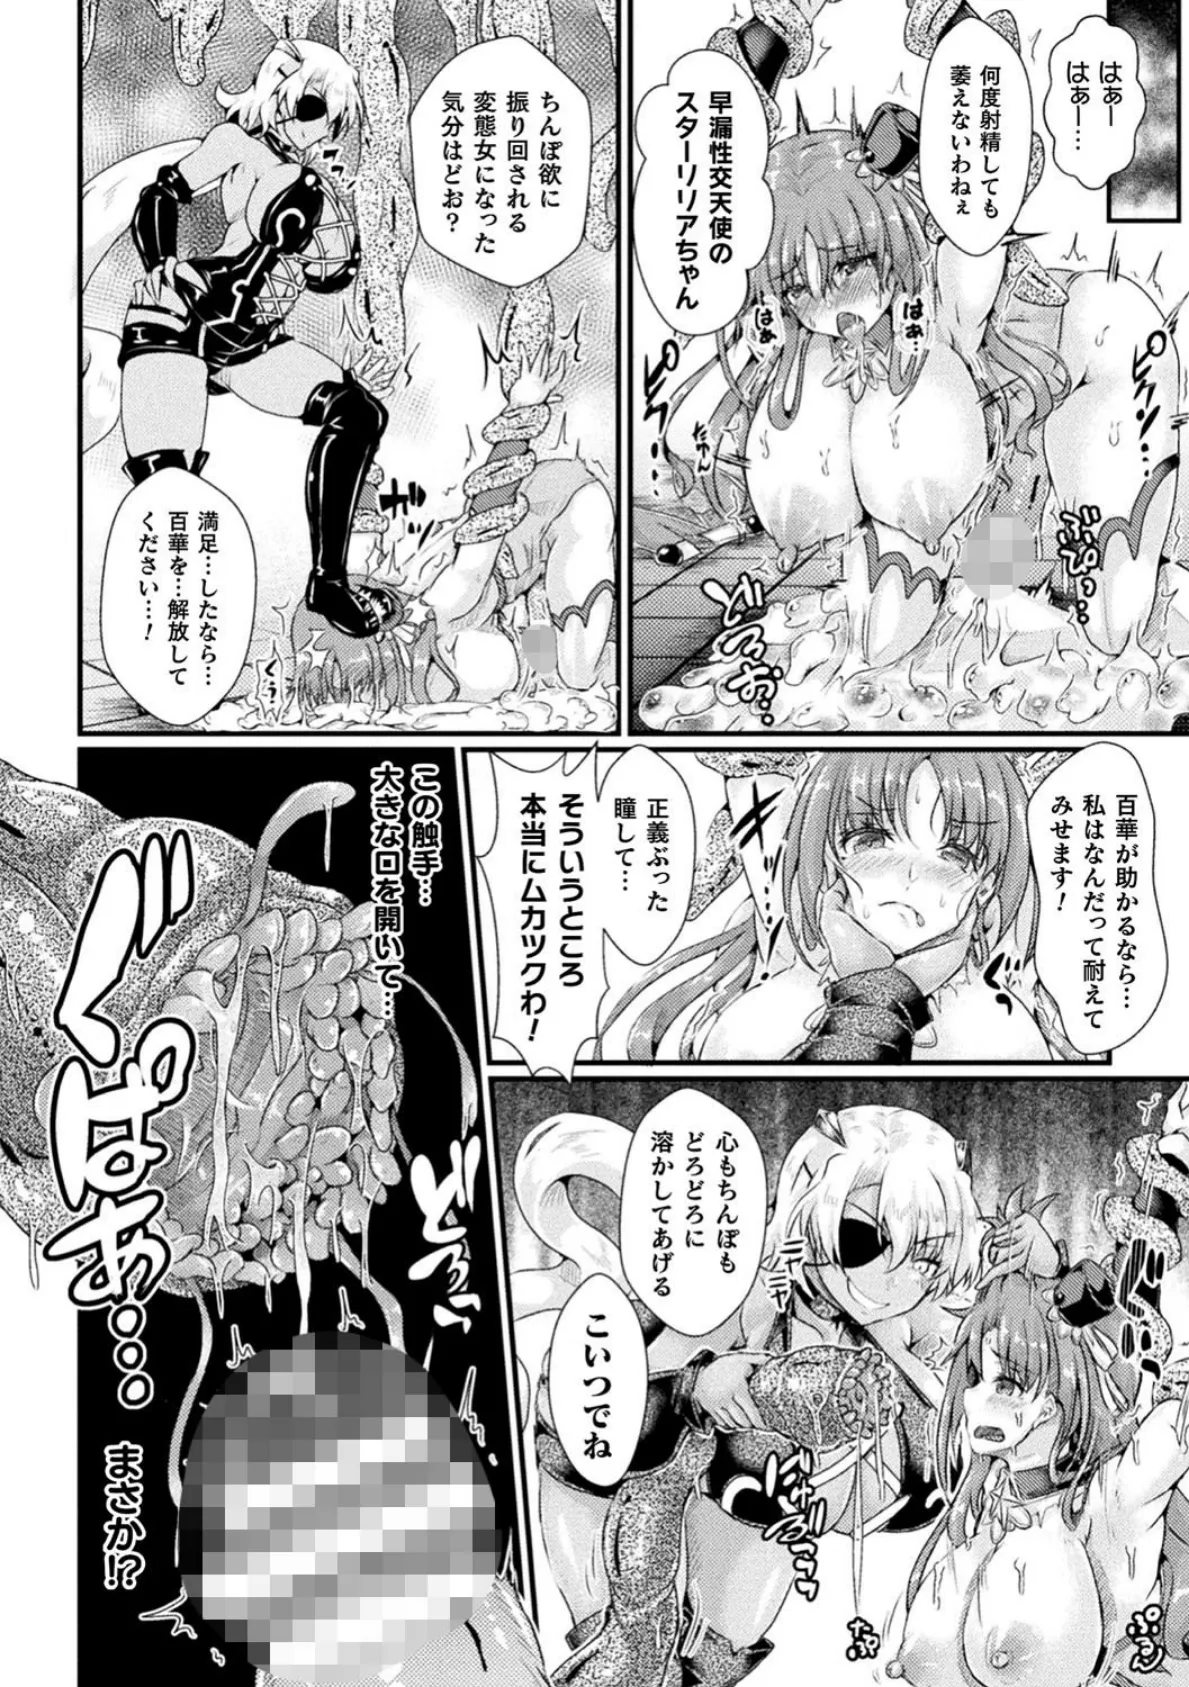 Corrupted Maiden 〜淫欲に堕ちる戦姫たち〜【電子書籍限定版】 10ページ